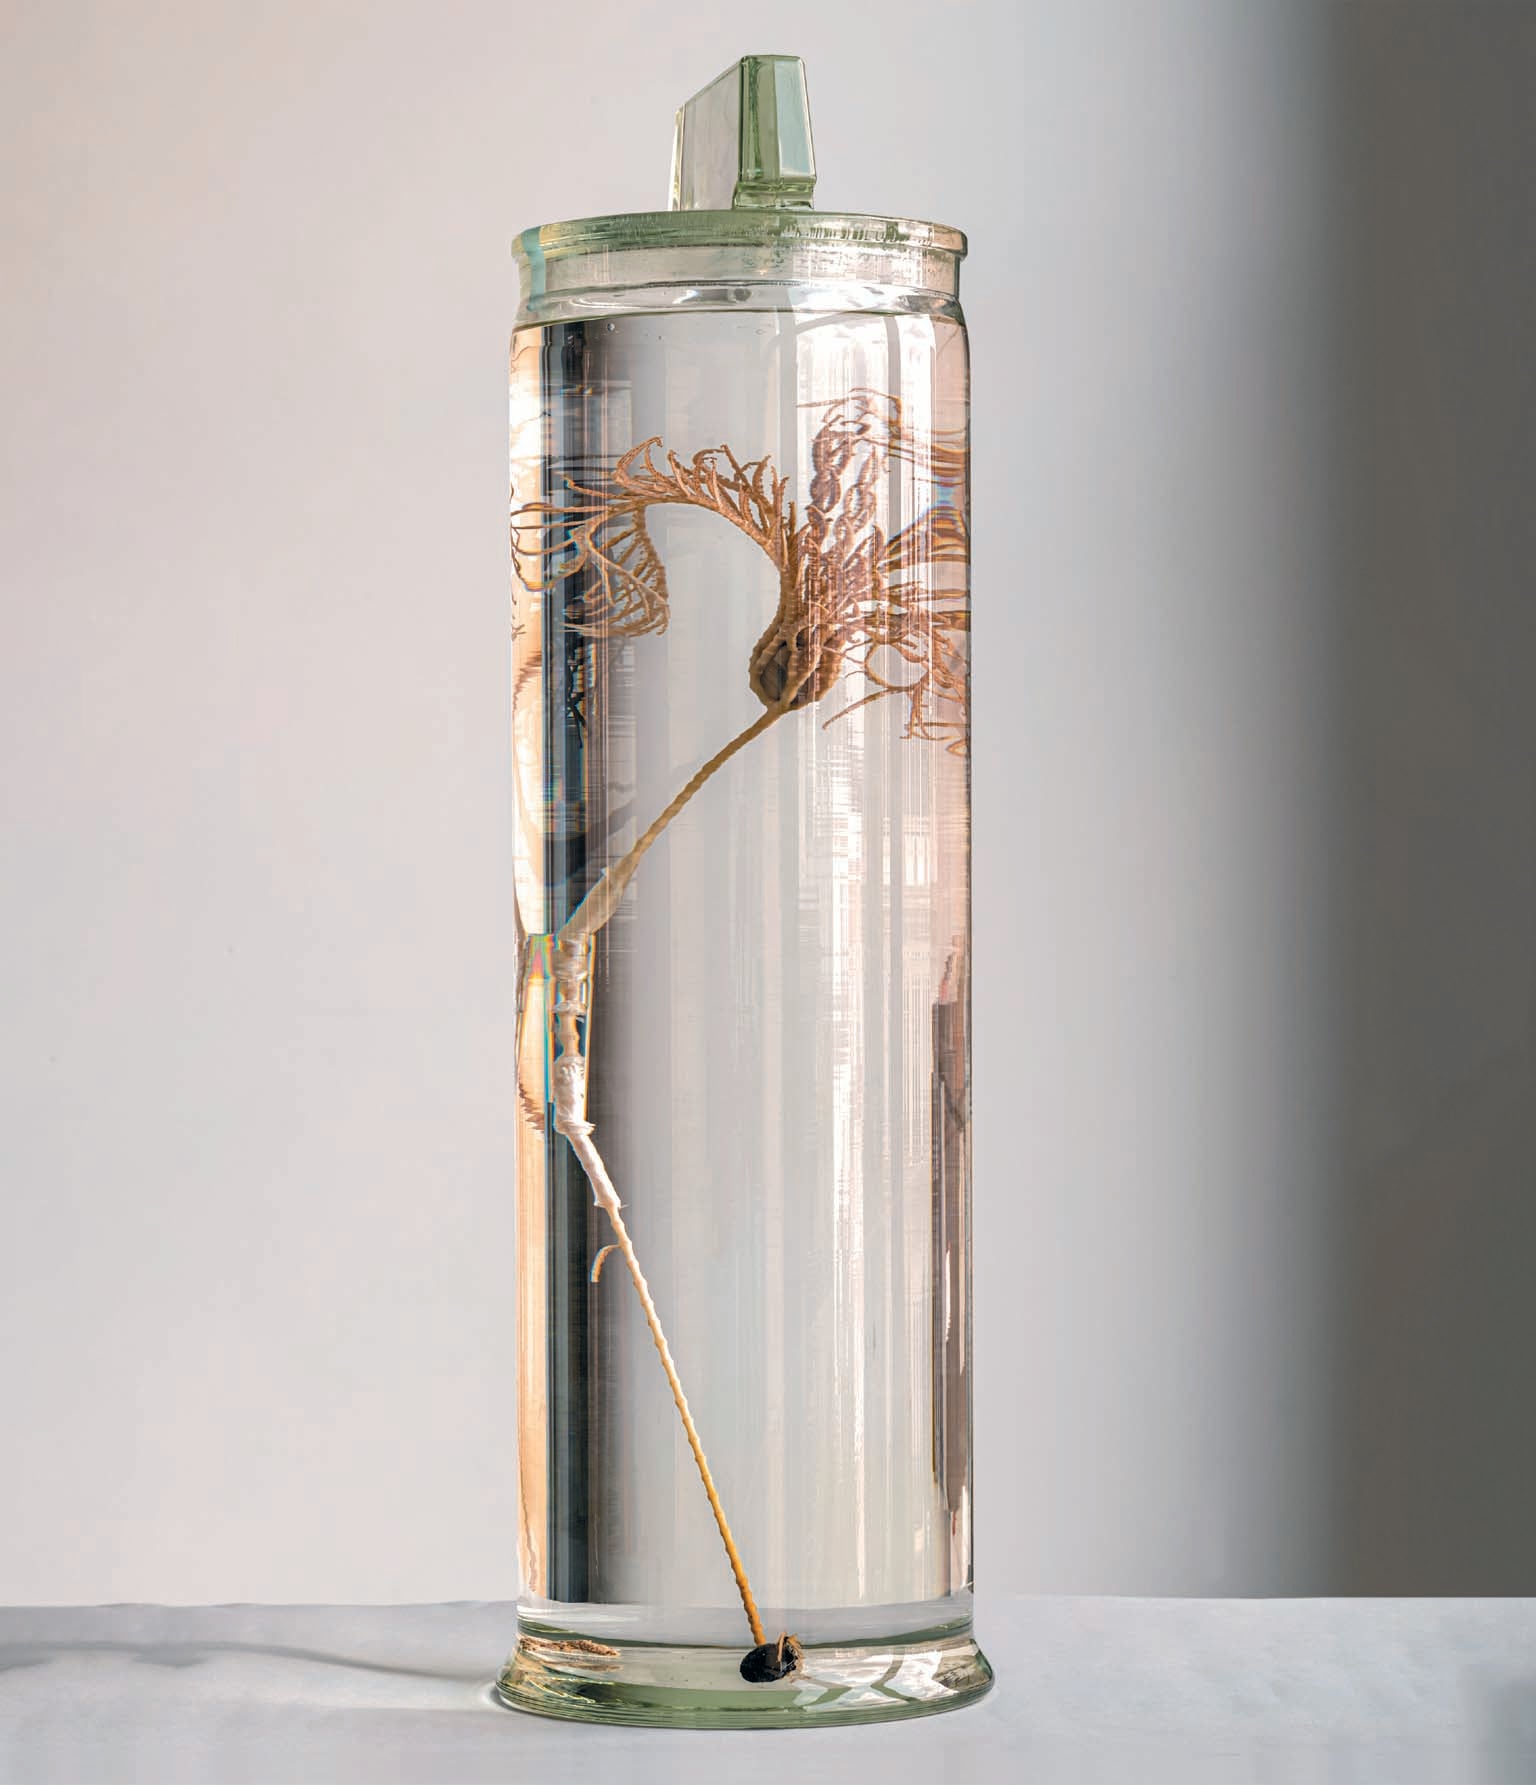 A crinoid, or sea lily, in a glass jar.